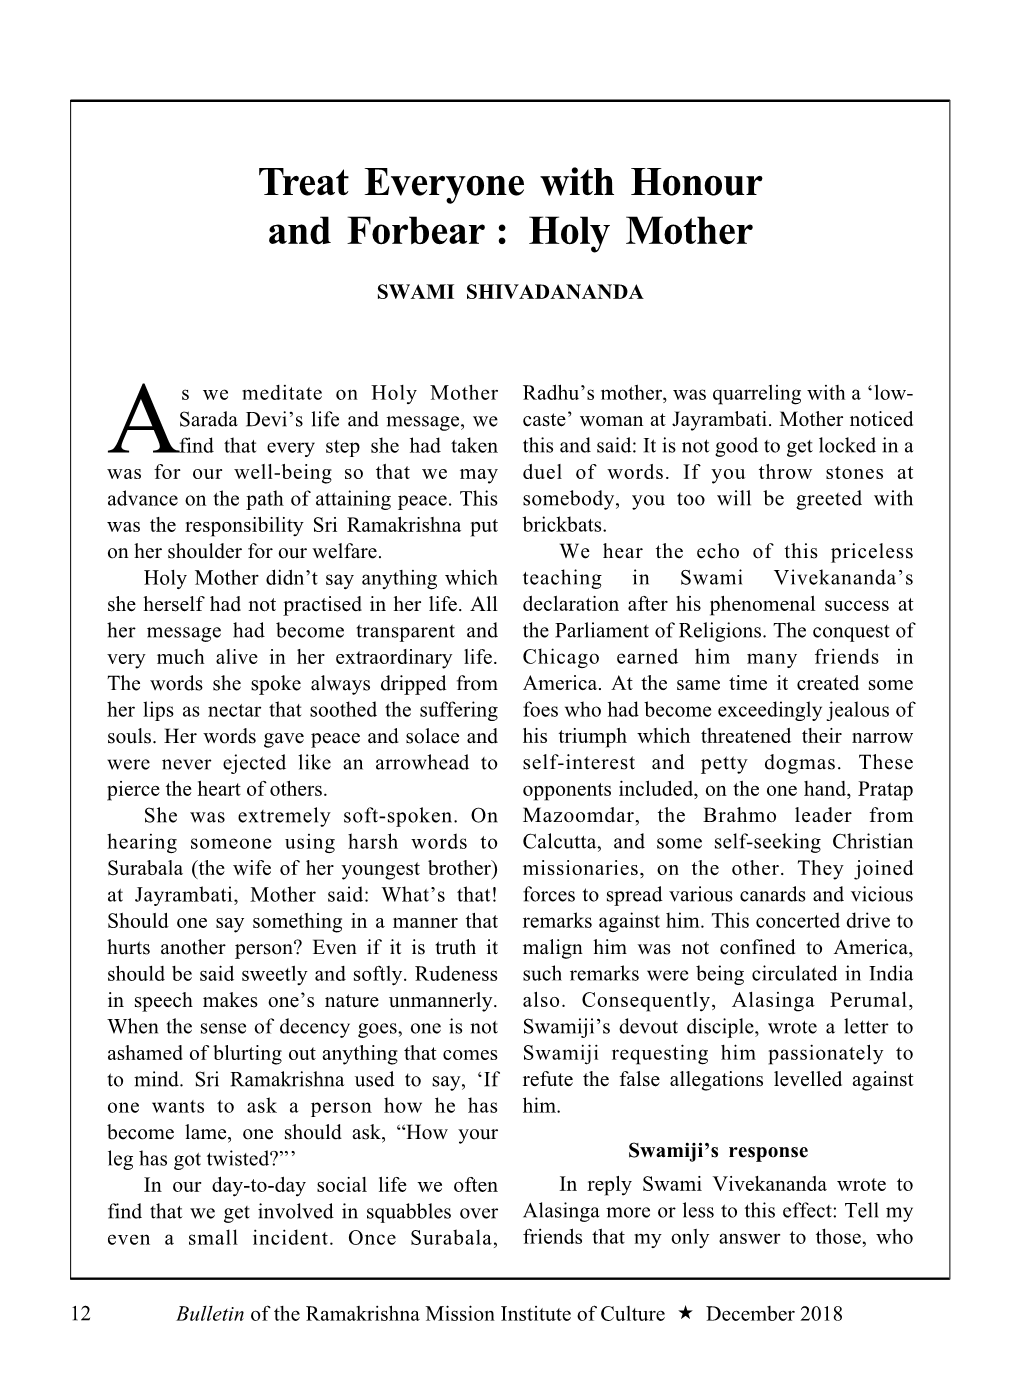 18 Bulletin :: Treat Everyone with Honor and Forbear – Holy Mother